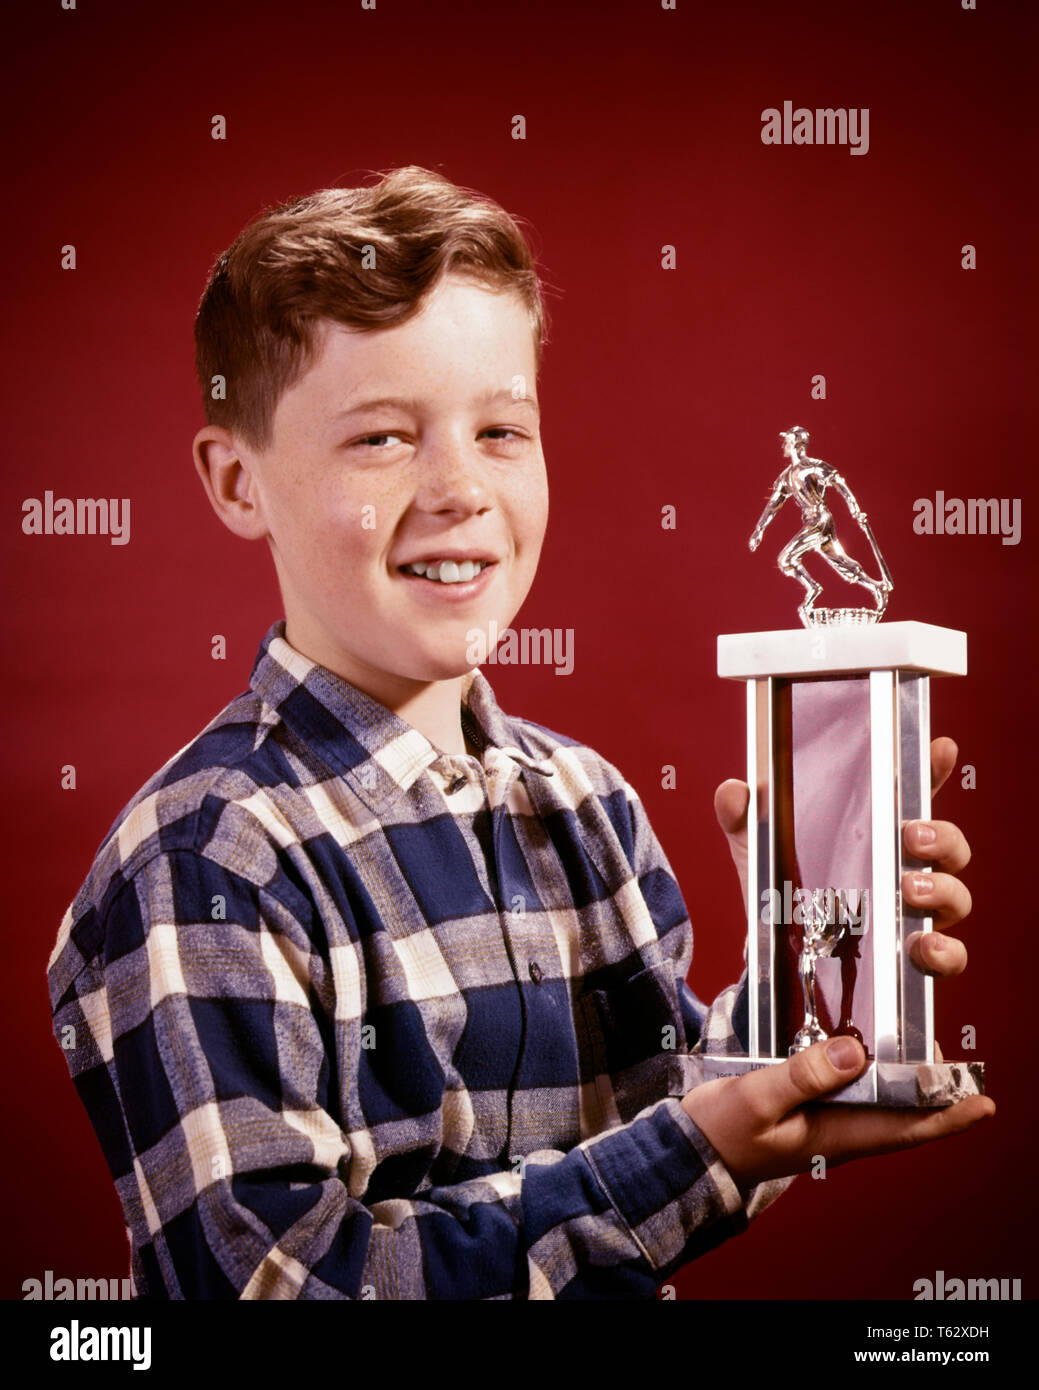 1960s SMILING BOY HOLDING LITTLE LEAGUE BASEBALL TROPHY LOOKING AT CAMERA - kj3660 HAR001 HARS LIFESTYLE SATISFACTION CELEBRATION PROUD STUDIO SHOT COPY SPACE TROPHY WINNER INSPIRATION MALES PLAID CONFIDENCE EXPRESSIONS AWARD EYE CONTACT HEAD AND SHOULDERS CHEERFUL VICTORY EXCITEMENT PRIZE RECREATION PRIDE PROUDLY SMILES JOYFUL BALL GAME BALL SPORT JUVENILES PRE-TEEN PRE-TEEN BOY BASEBALL BAT CAUCASIAN ETHNICITY HAR001 OLD FASHIONED Stock Photo